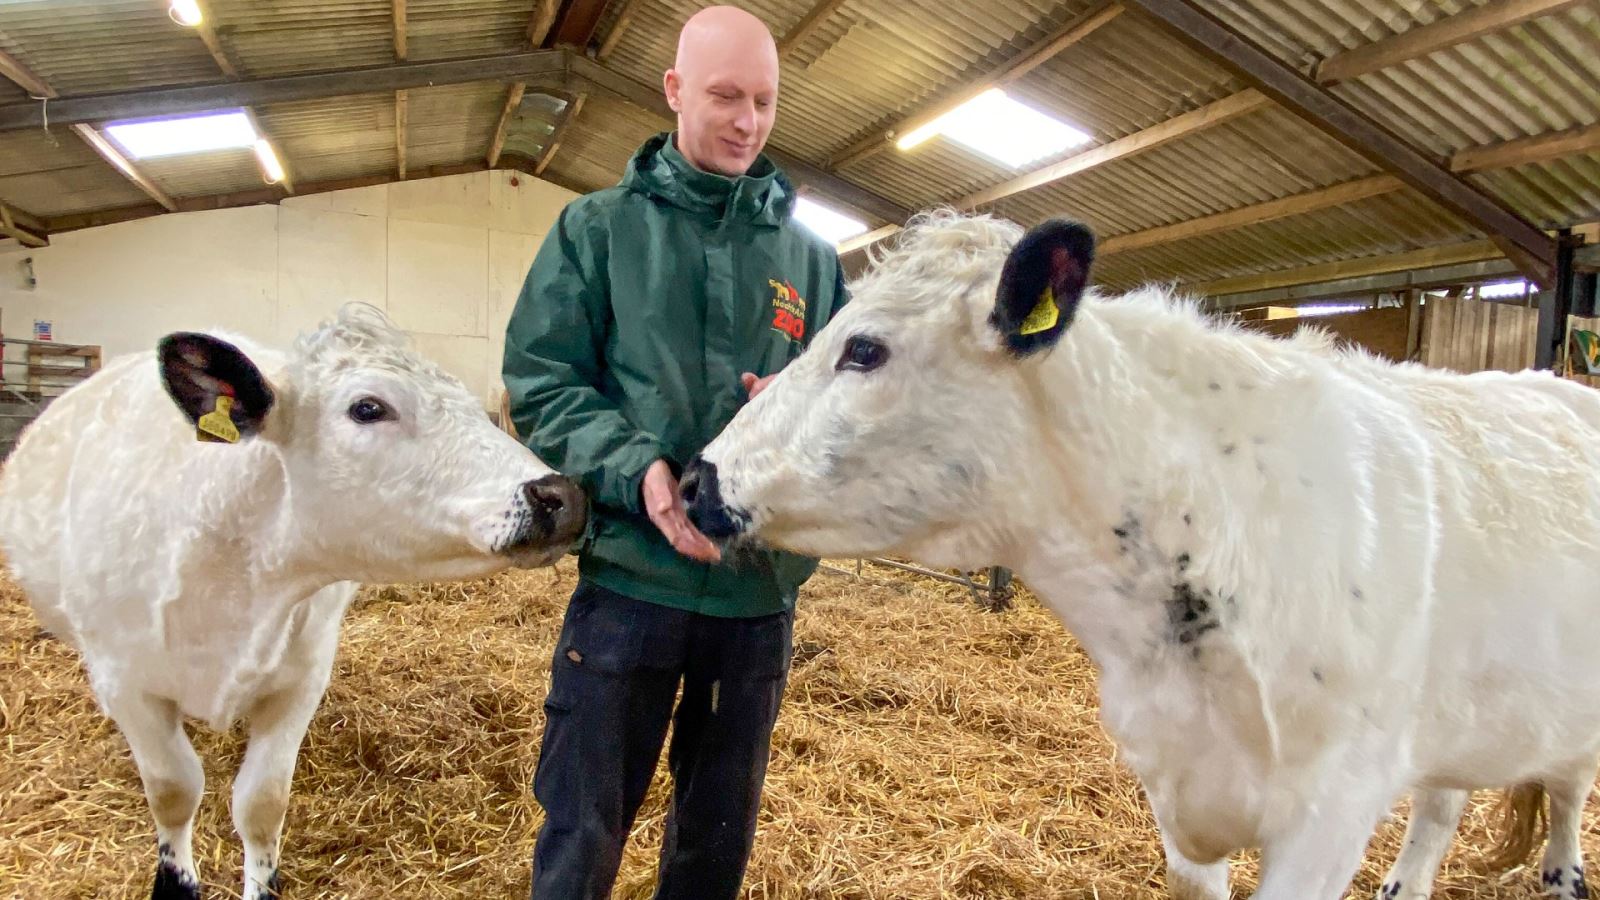 Chris Wilkinson: Curator of Noah’s Ark with Rare Breed Jersey Cow’s